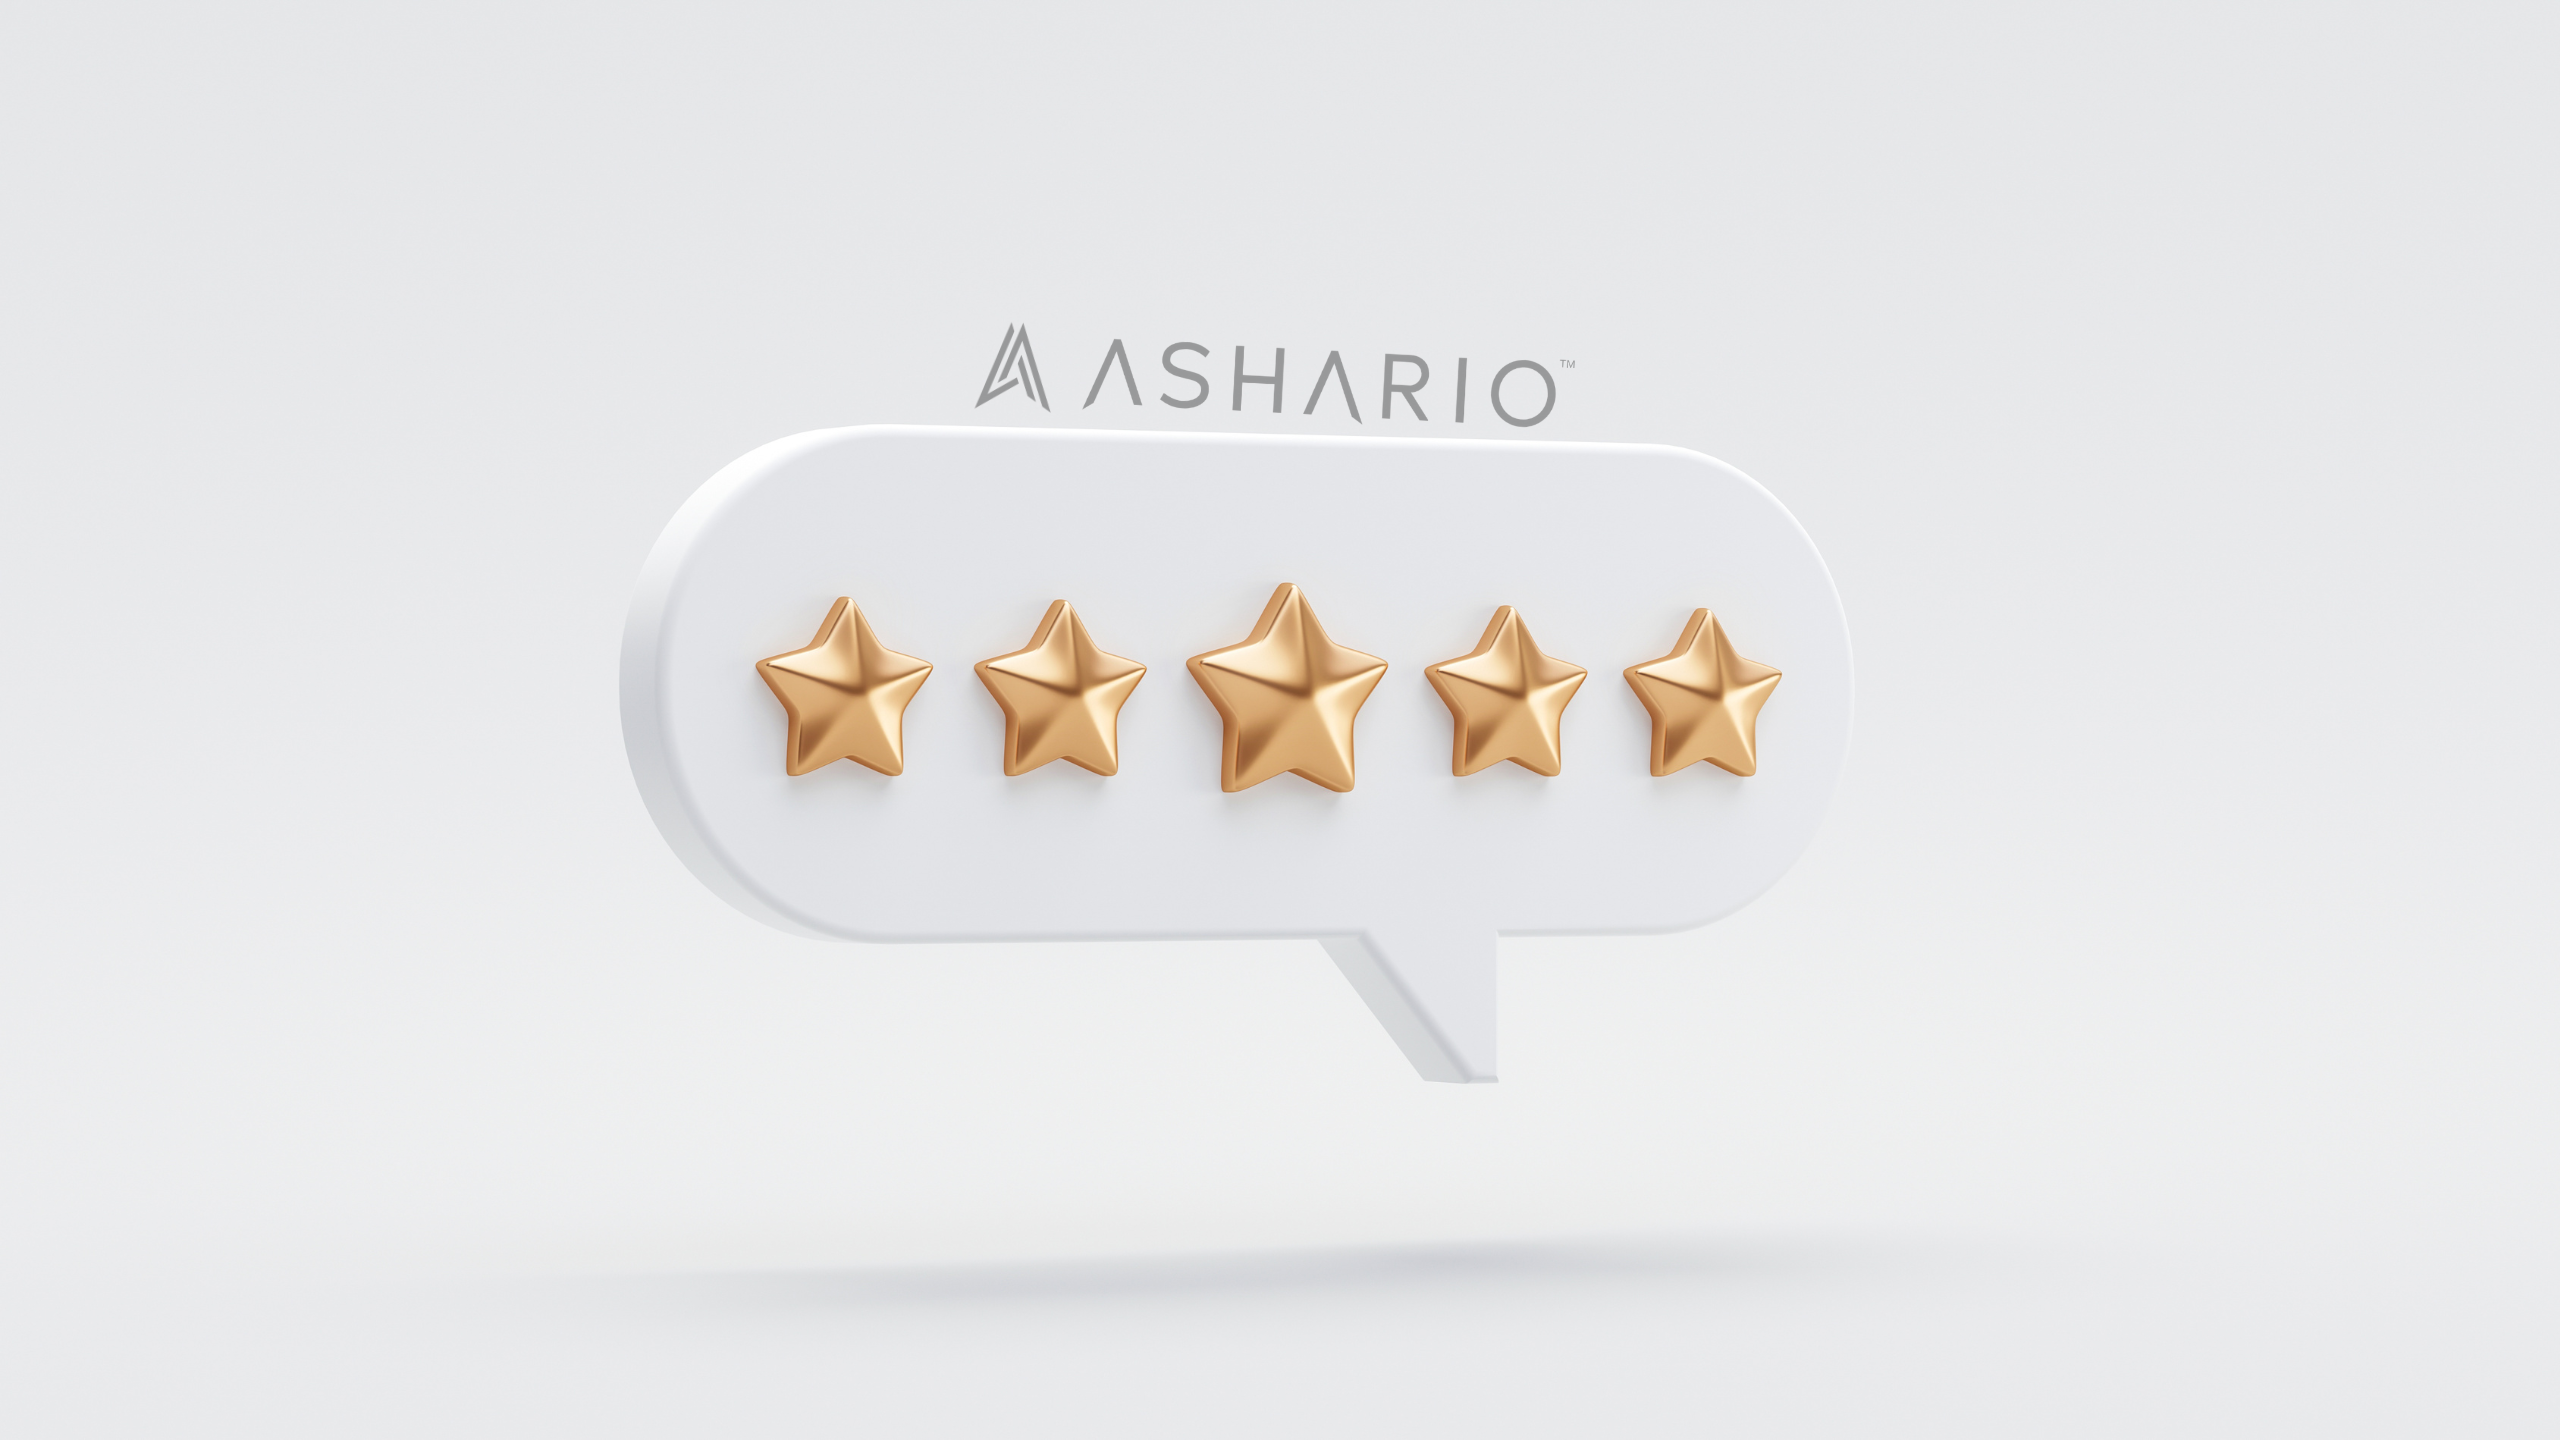 Embark on a journey through Ashario Cannabis Stores as we unveil a review of excellence. Discover the unparalleled shopping experience offered at Ashario Cannabis locations, from the moment you step through the door.